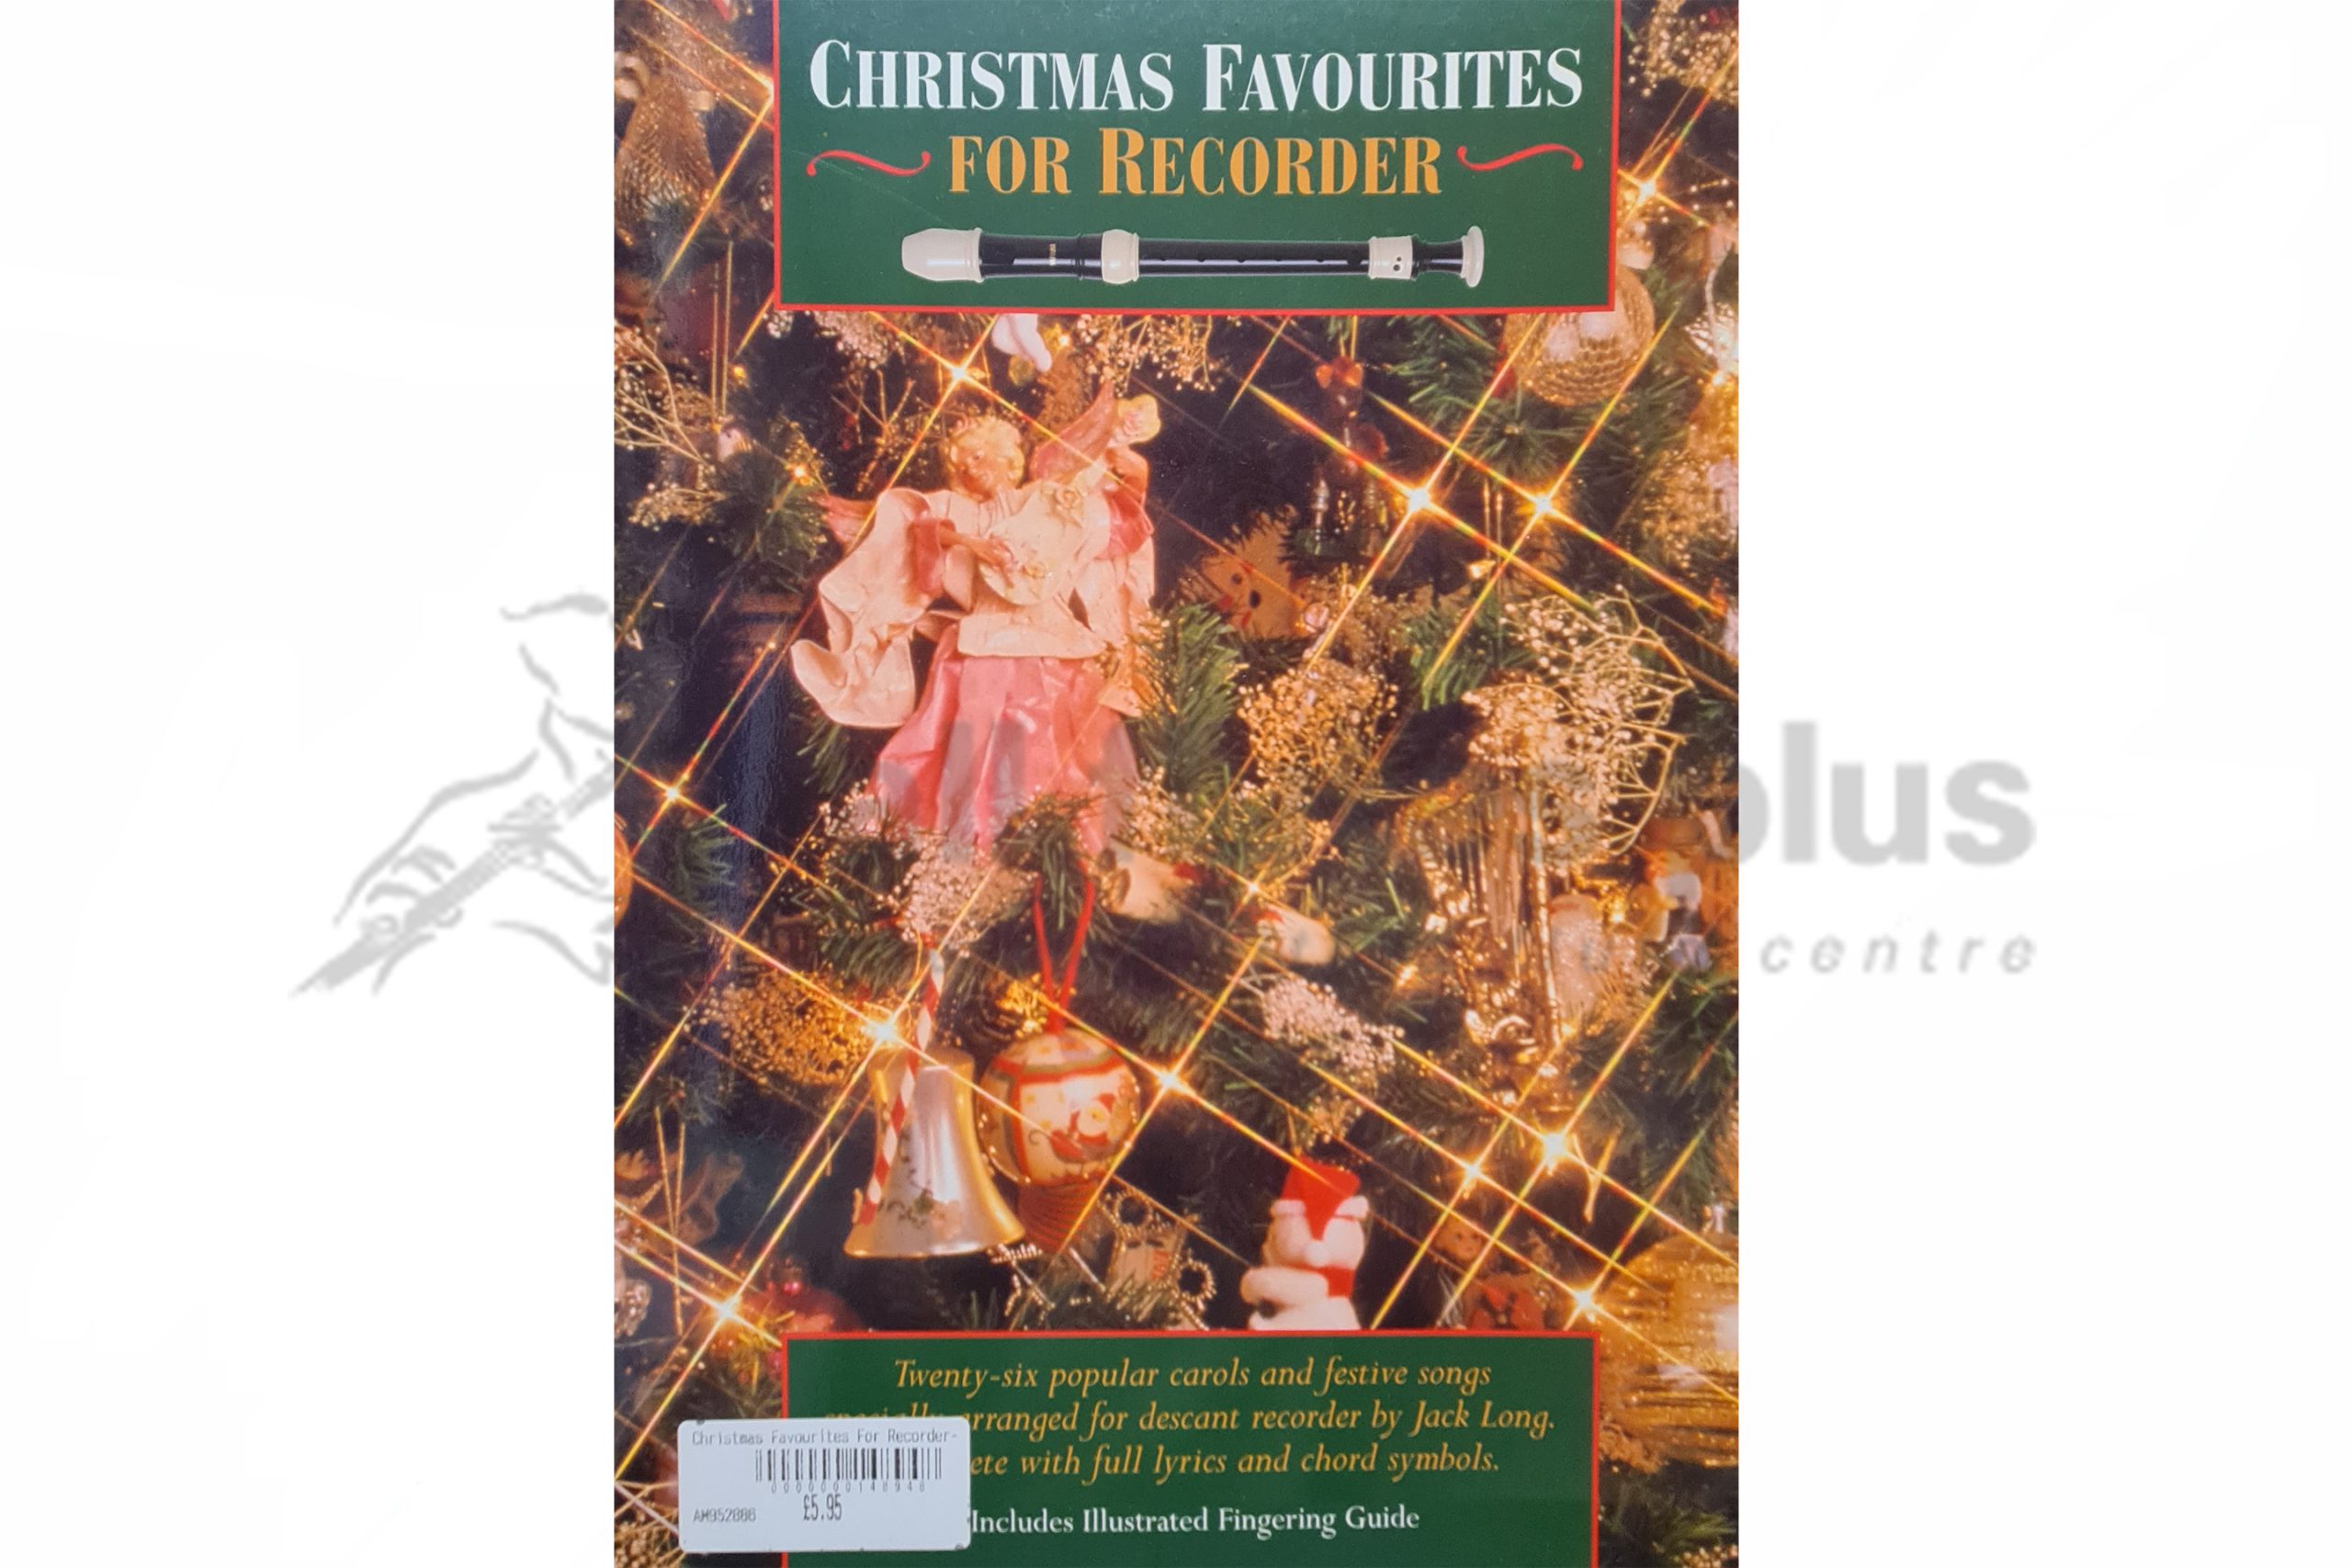 Christmas Favourites for Recorder